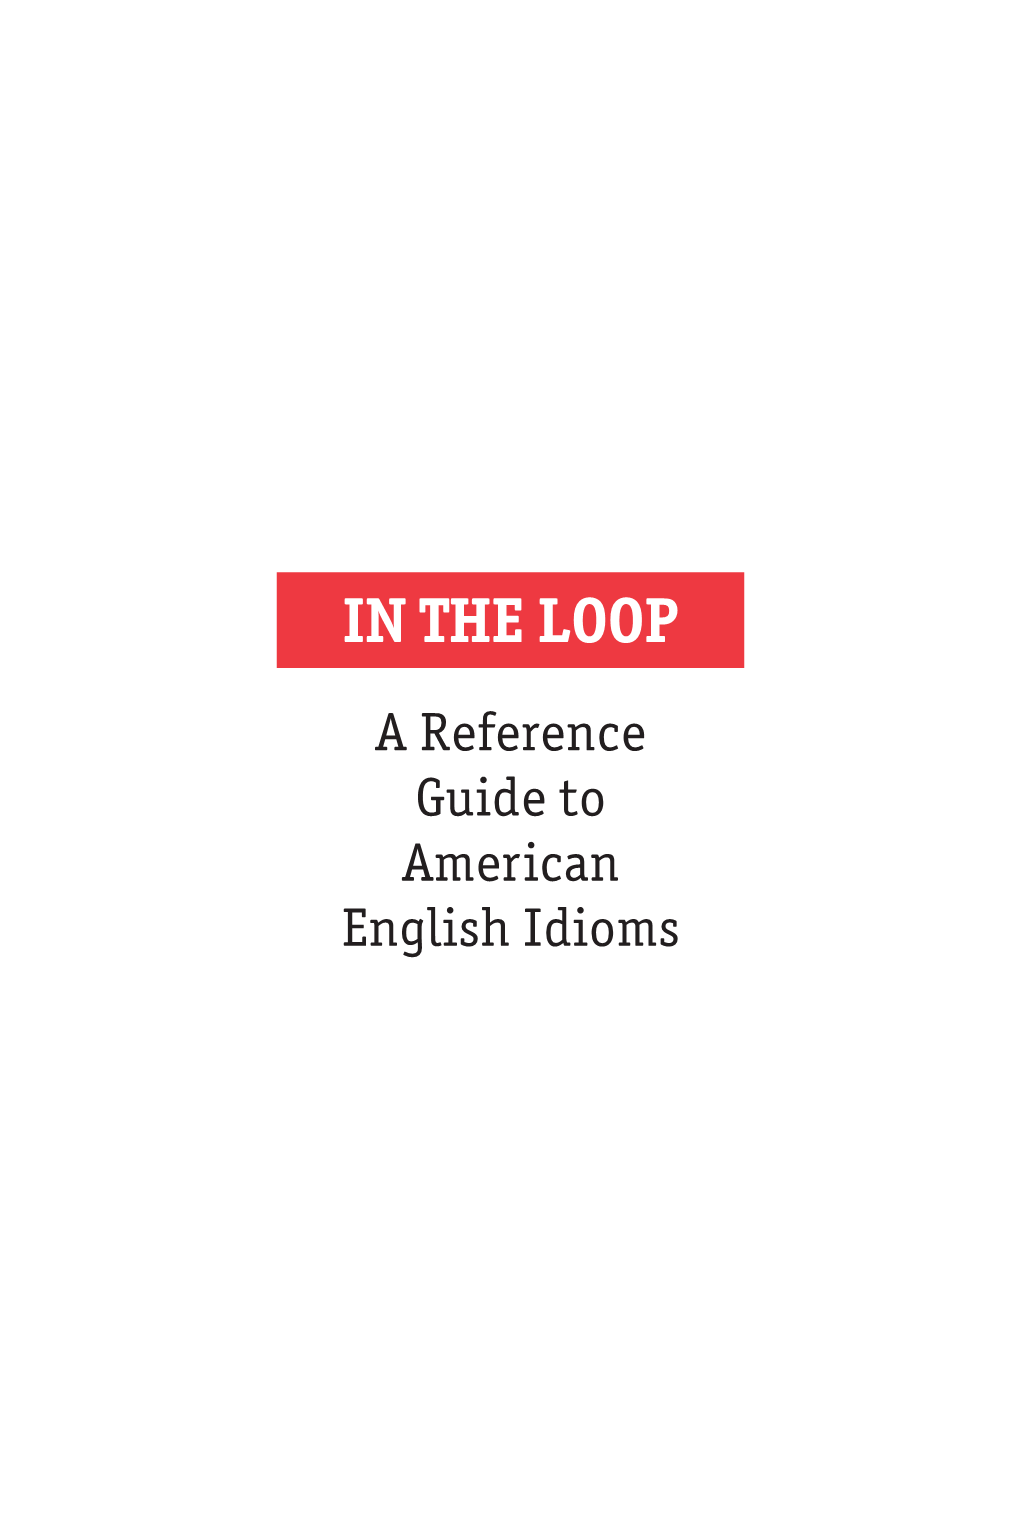 IN the LOOP, a Reference Guide to American English Idioms